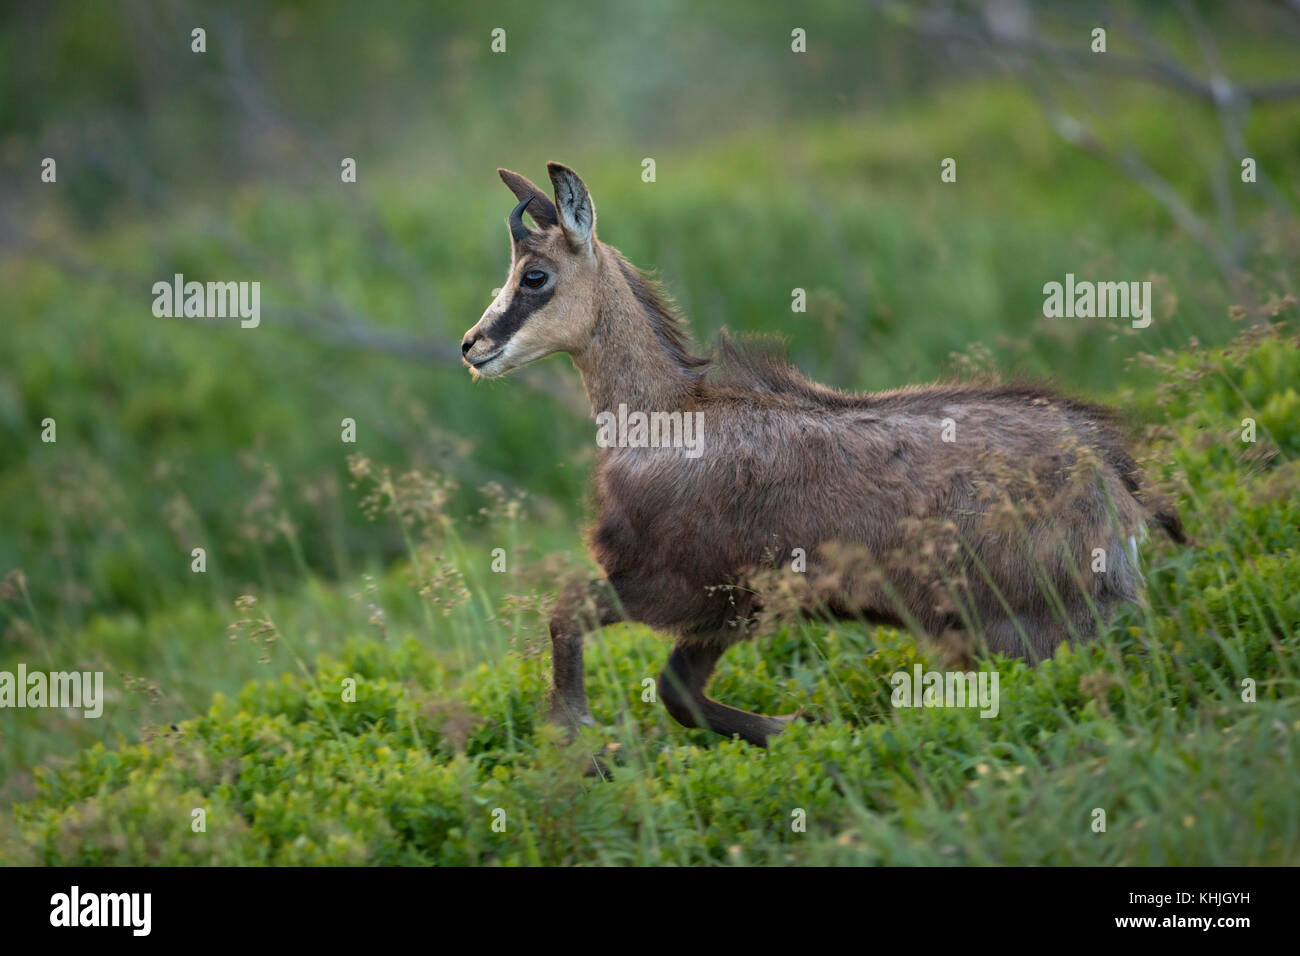 Chamois ( Rupicapra rupicapra ) young adolescent, running down towards the valley, playful, full of joy, jumping over fresh green low shrubs, Europe. Stock Photo